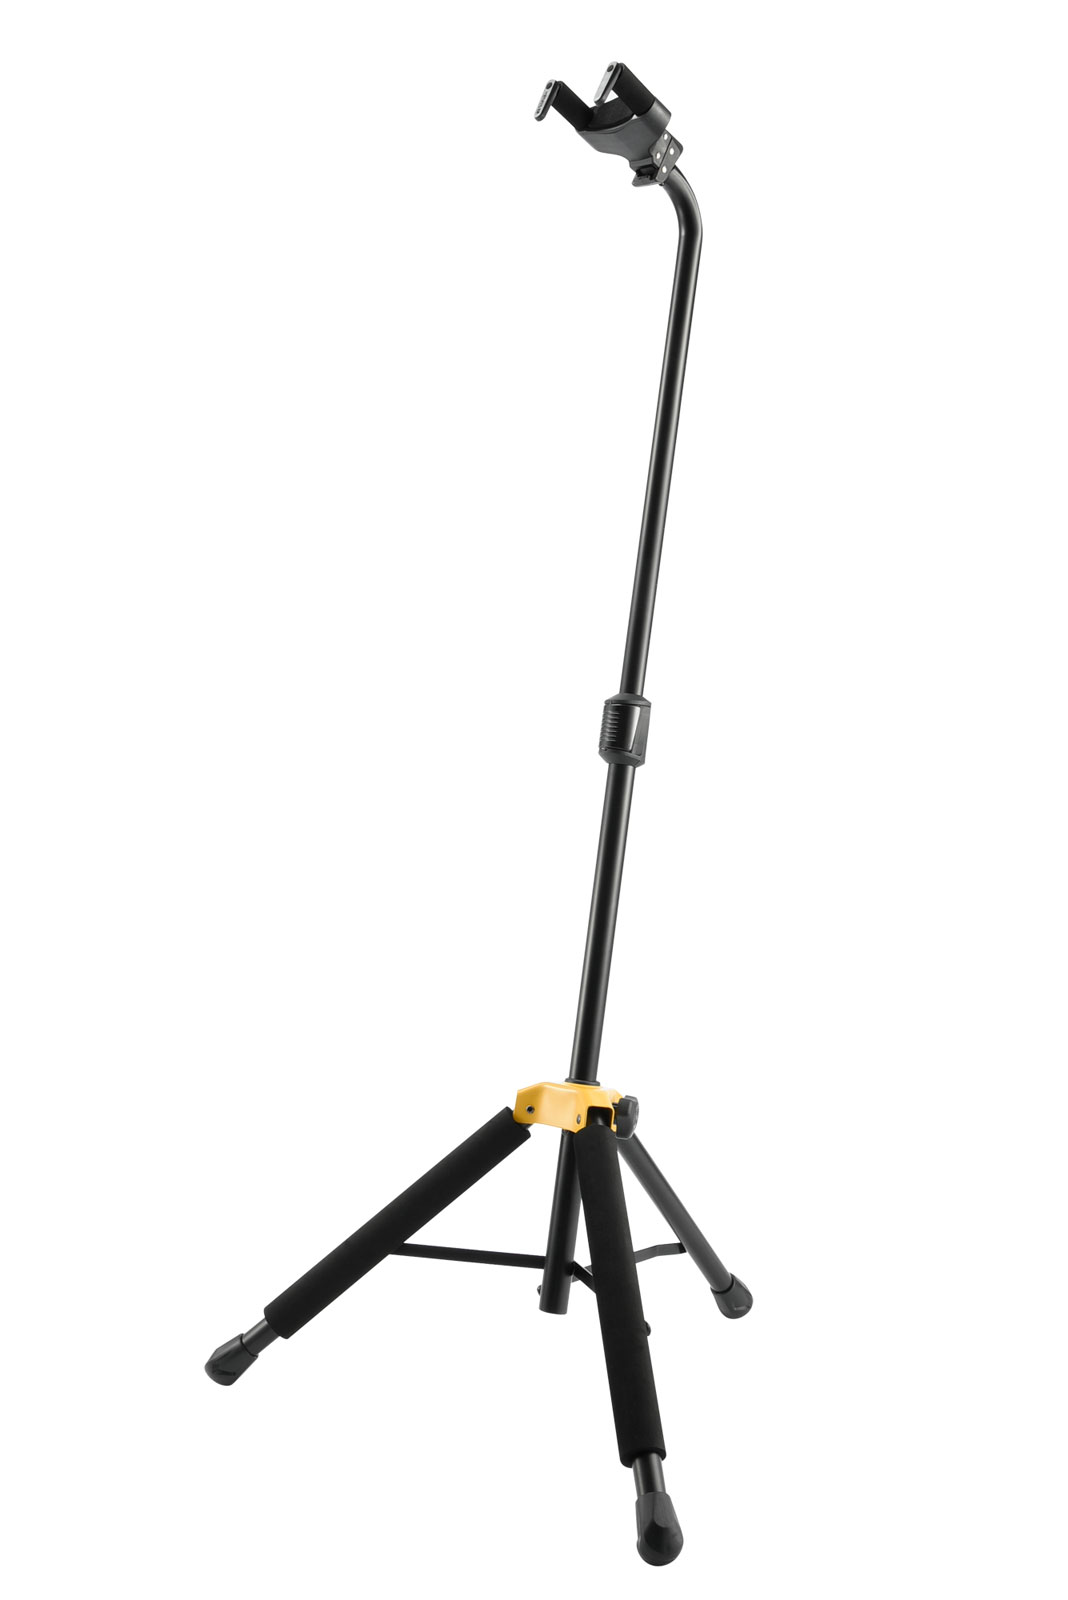 HERCULES STANDS SUPPORT GUITARE GS414B PLUS